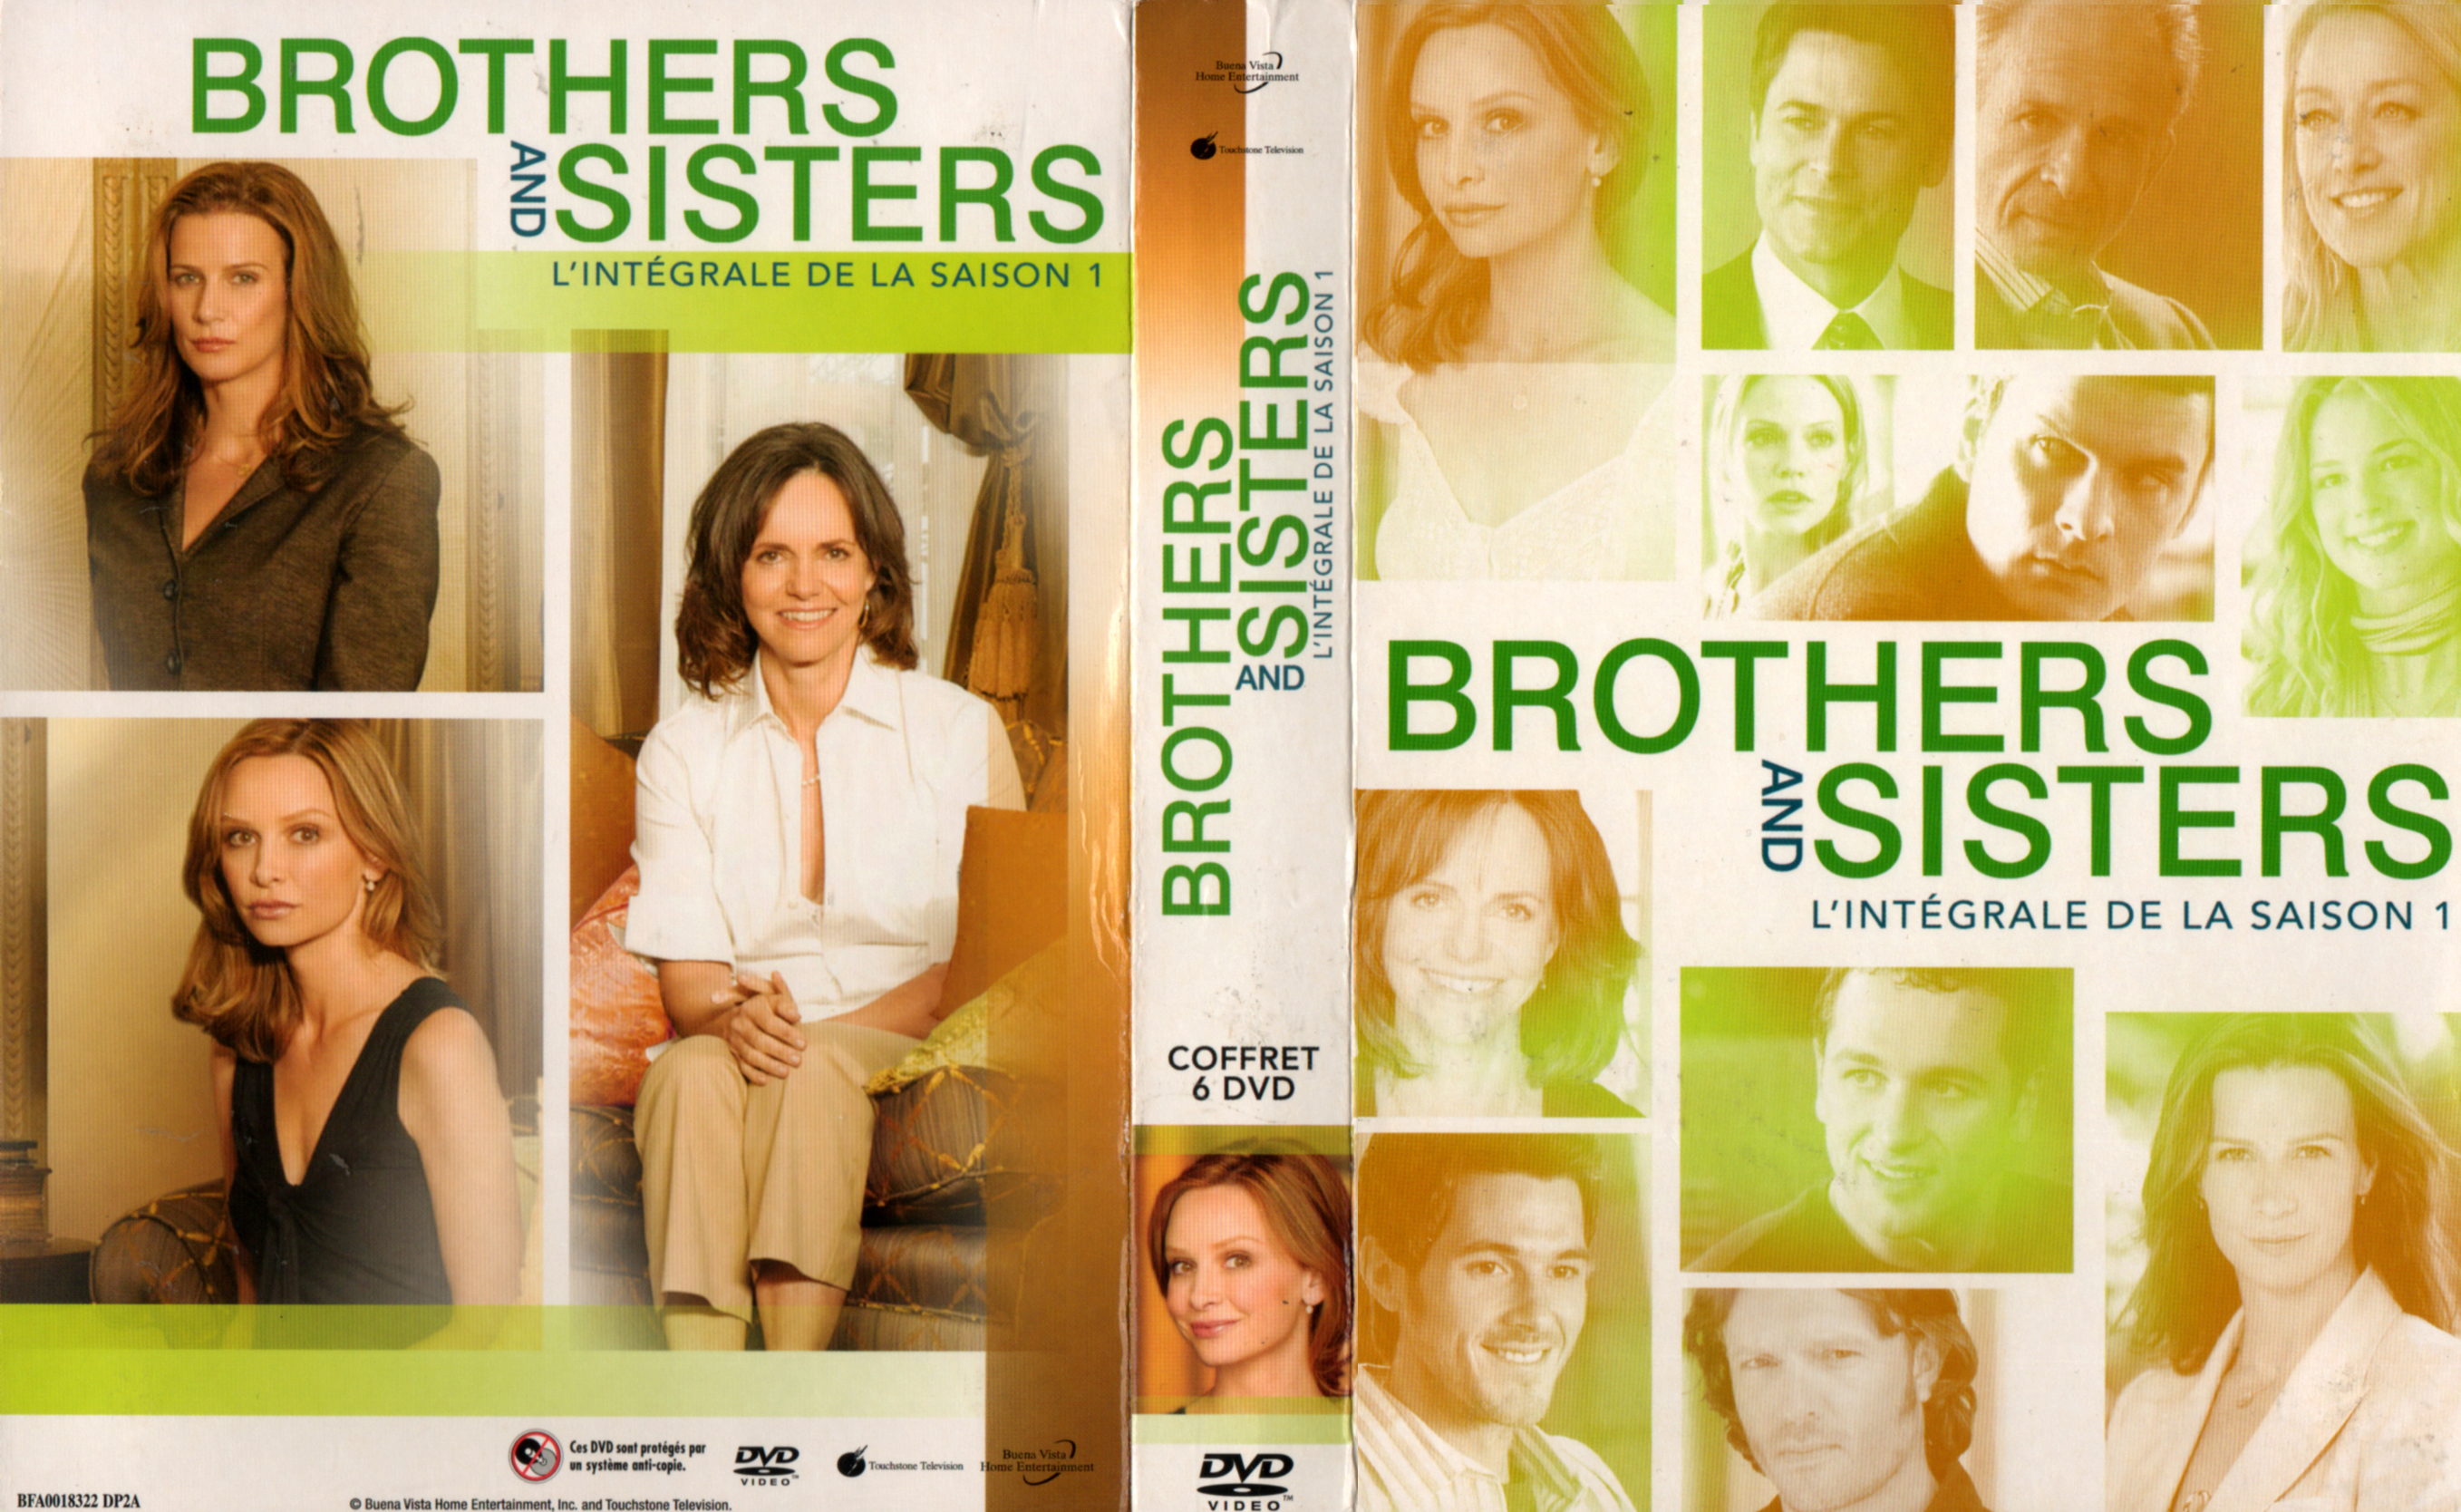 Jaquette DVD Brothers and Sisters Saison 1